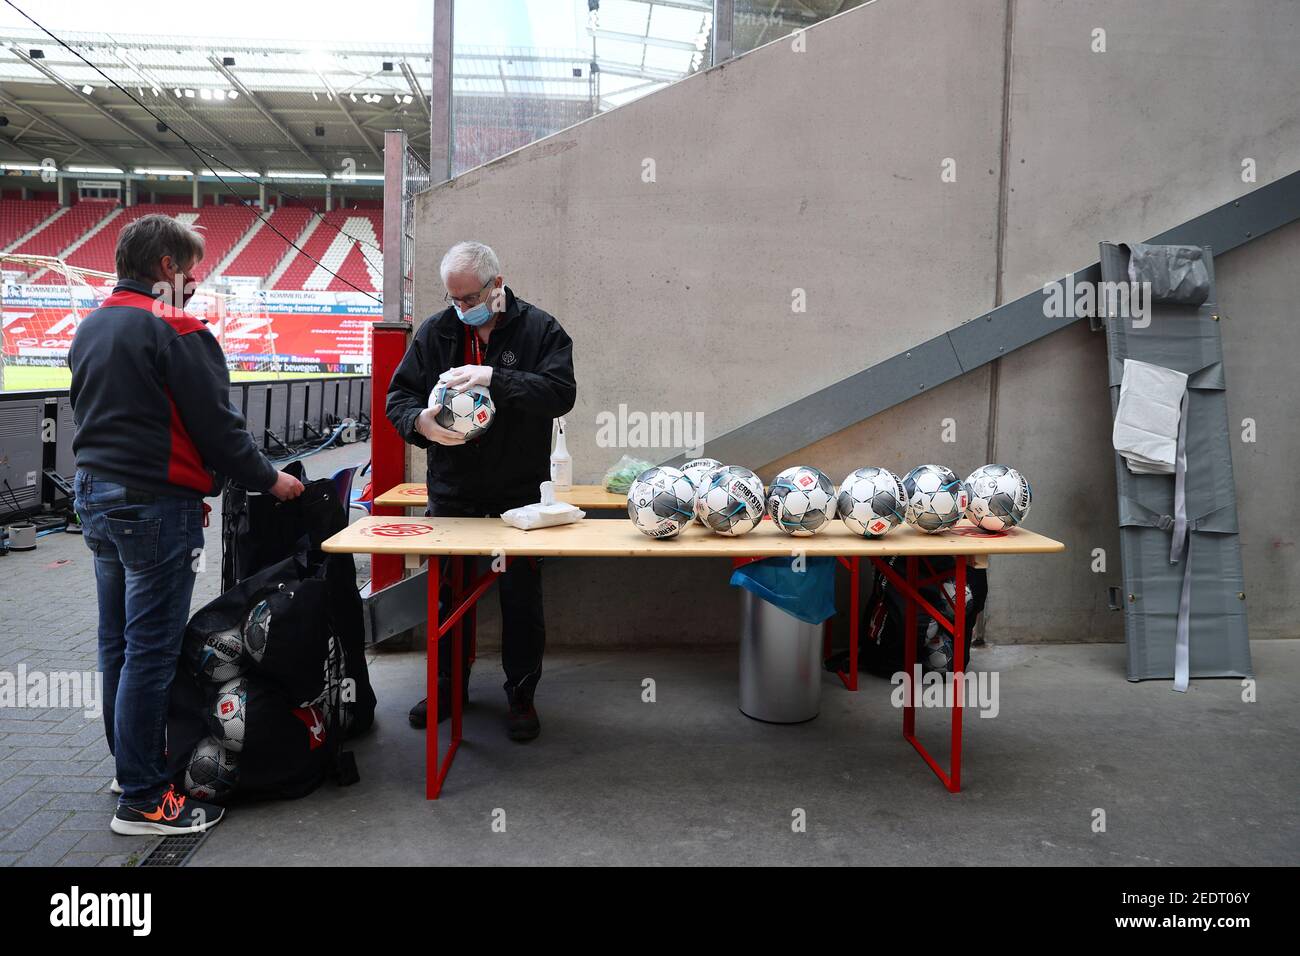 Soccer Football - Bundesliga - 1. FSV Mainz 05 v RB Leipzig - Opel Arena, Mainz, Germany - May 24, 2020  Matchballs are cleaned with disinfectant wipes before the match, as play resumes behind closed doors following the outbreak of the coronavirus disease (COVID-19)  REUTERS/Kai Pfaffenbach/Pool    DFL regulations prohibit any use of photographs as image sequences and/or quasi-video Stock Photo